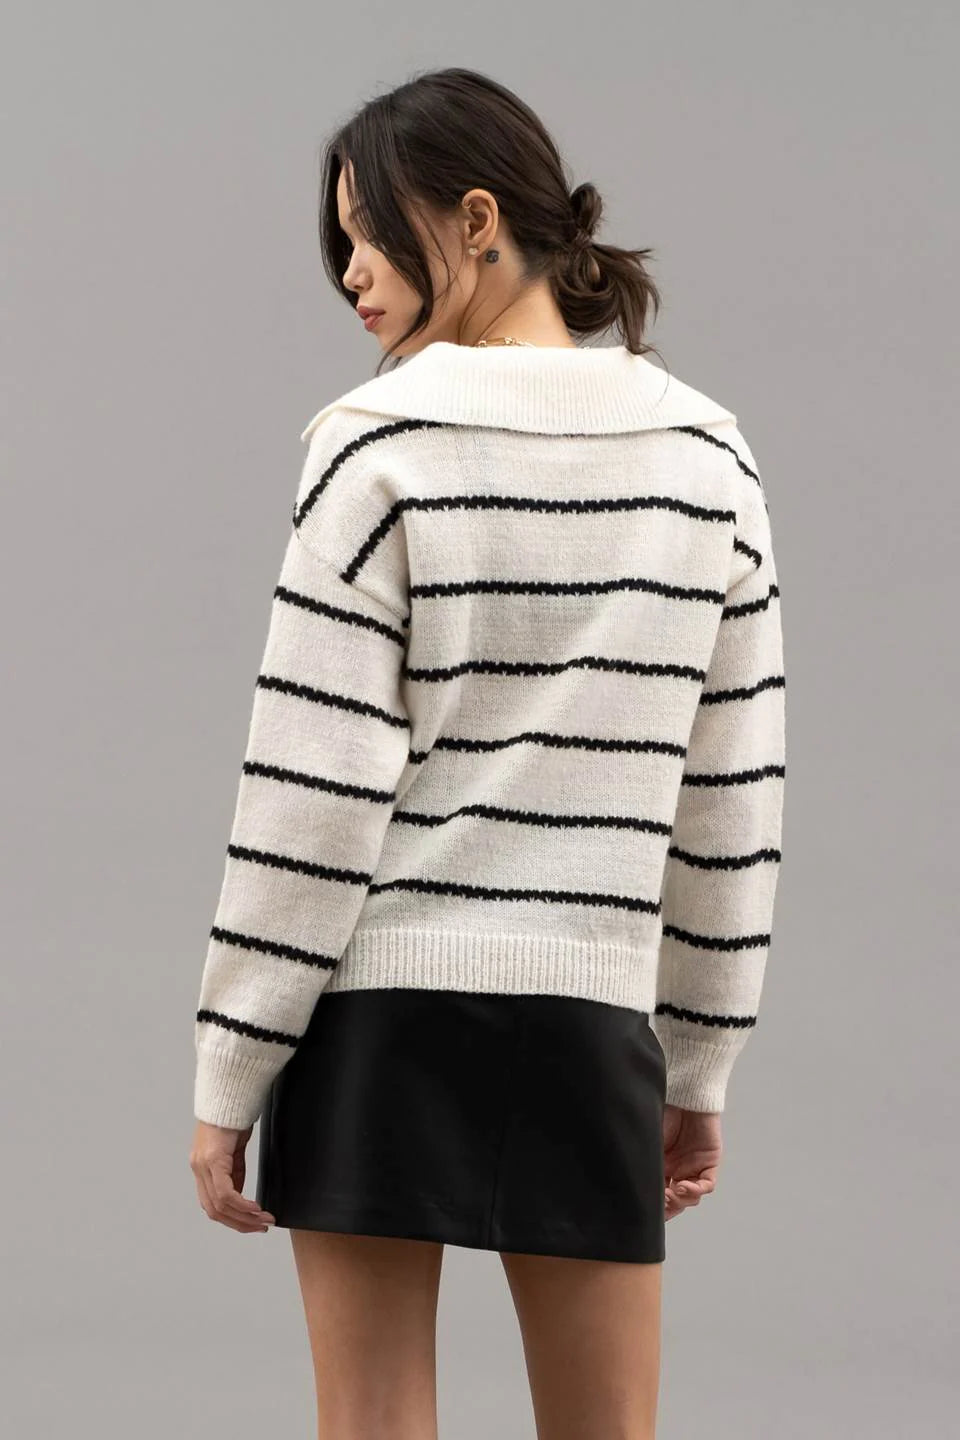 Blu Pepper Collared Striped Sweater with Button Detail